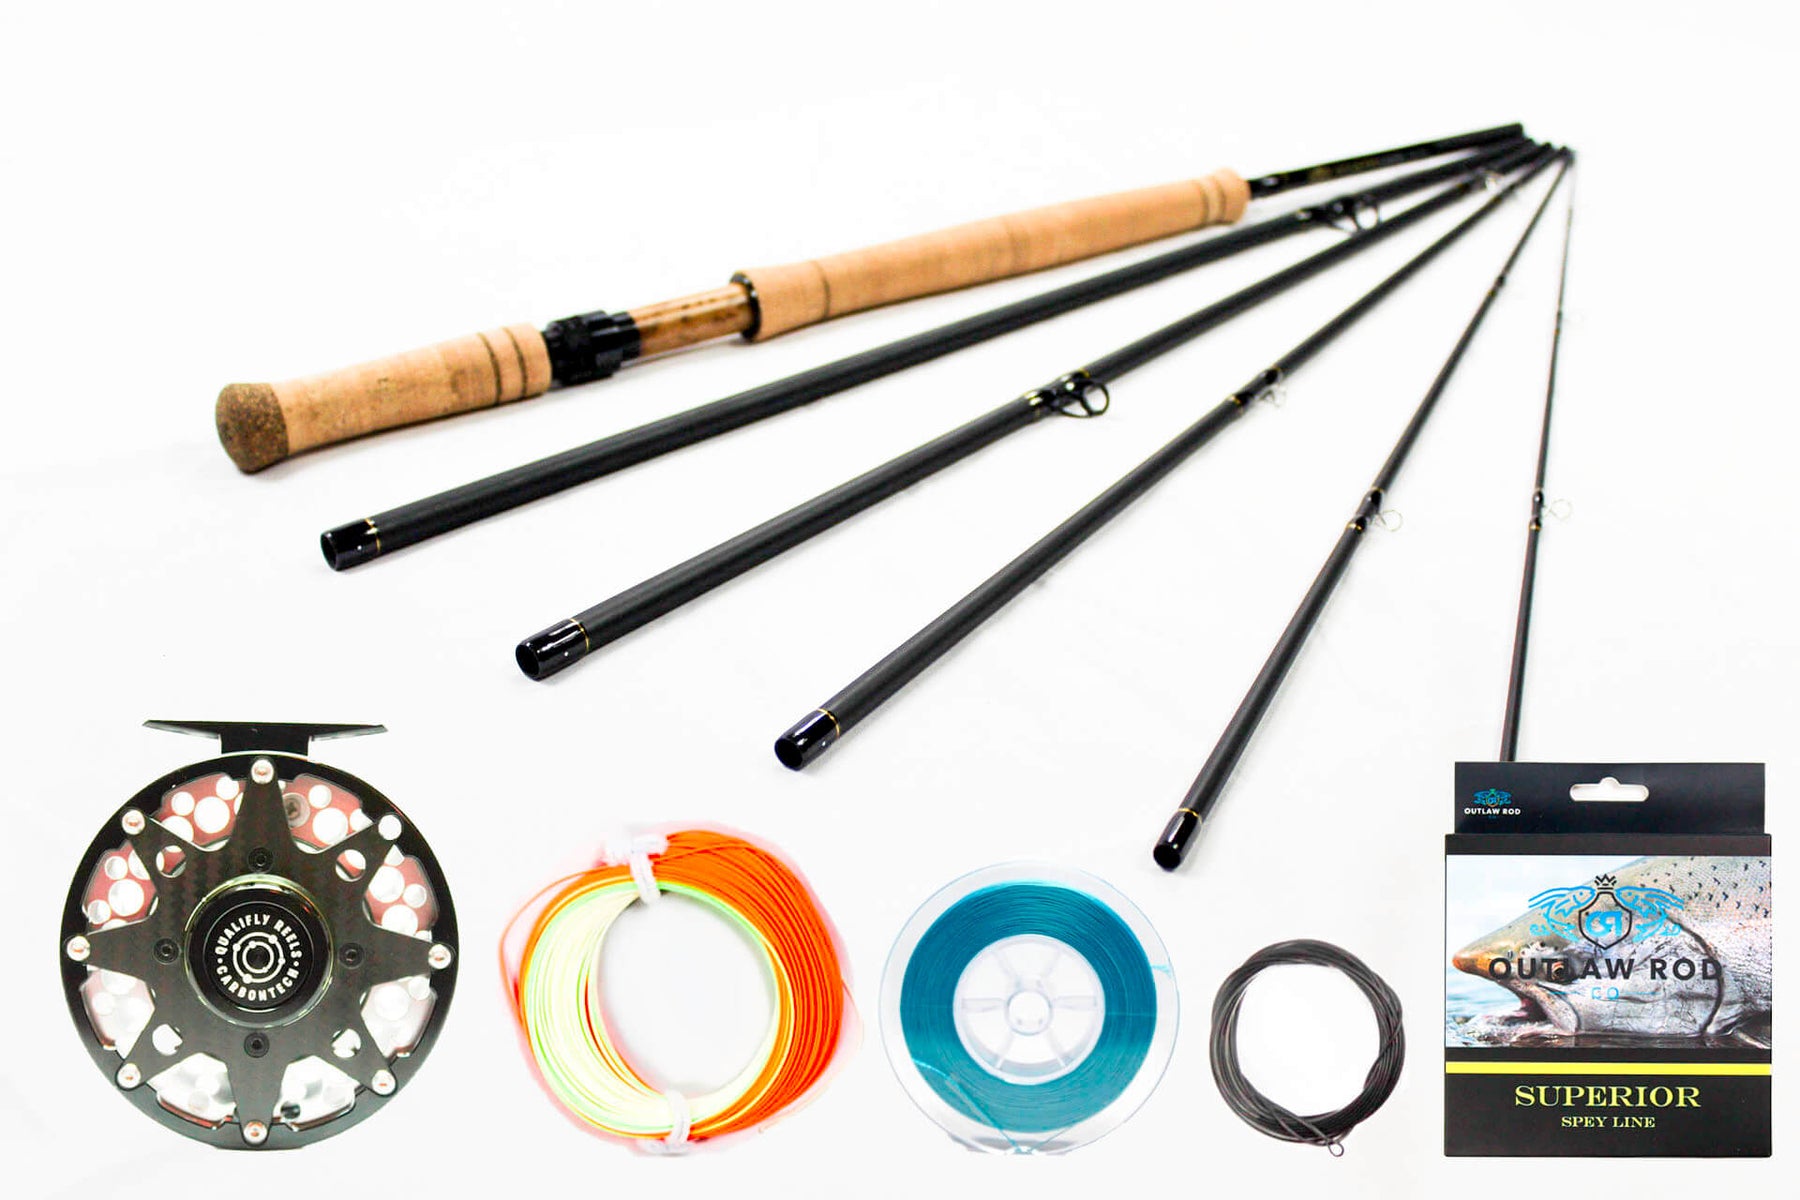 7wt 13ft M-Series (Spey Rod) and Oversized 9-10wt Qualifly